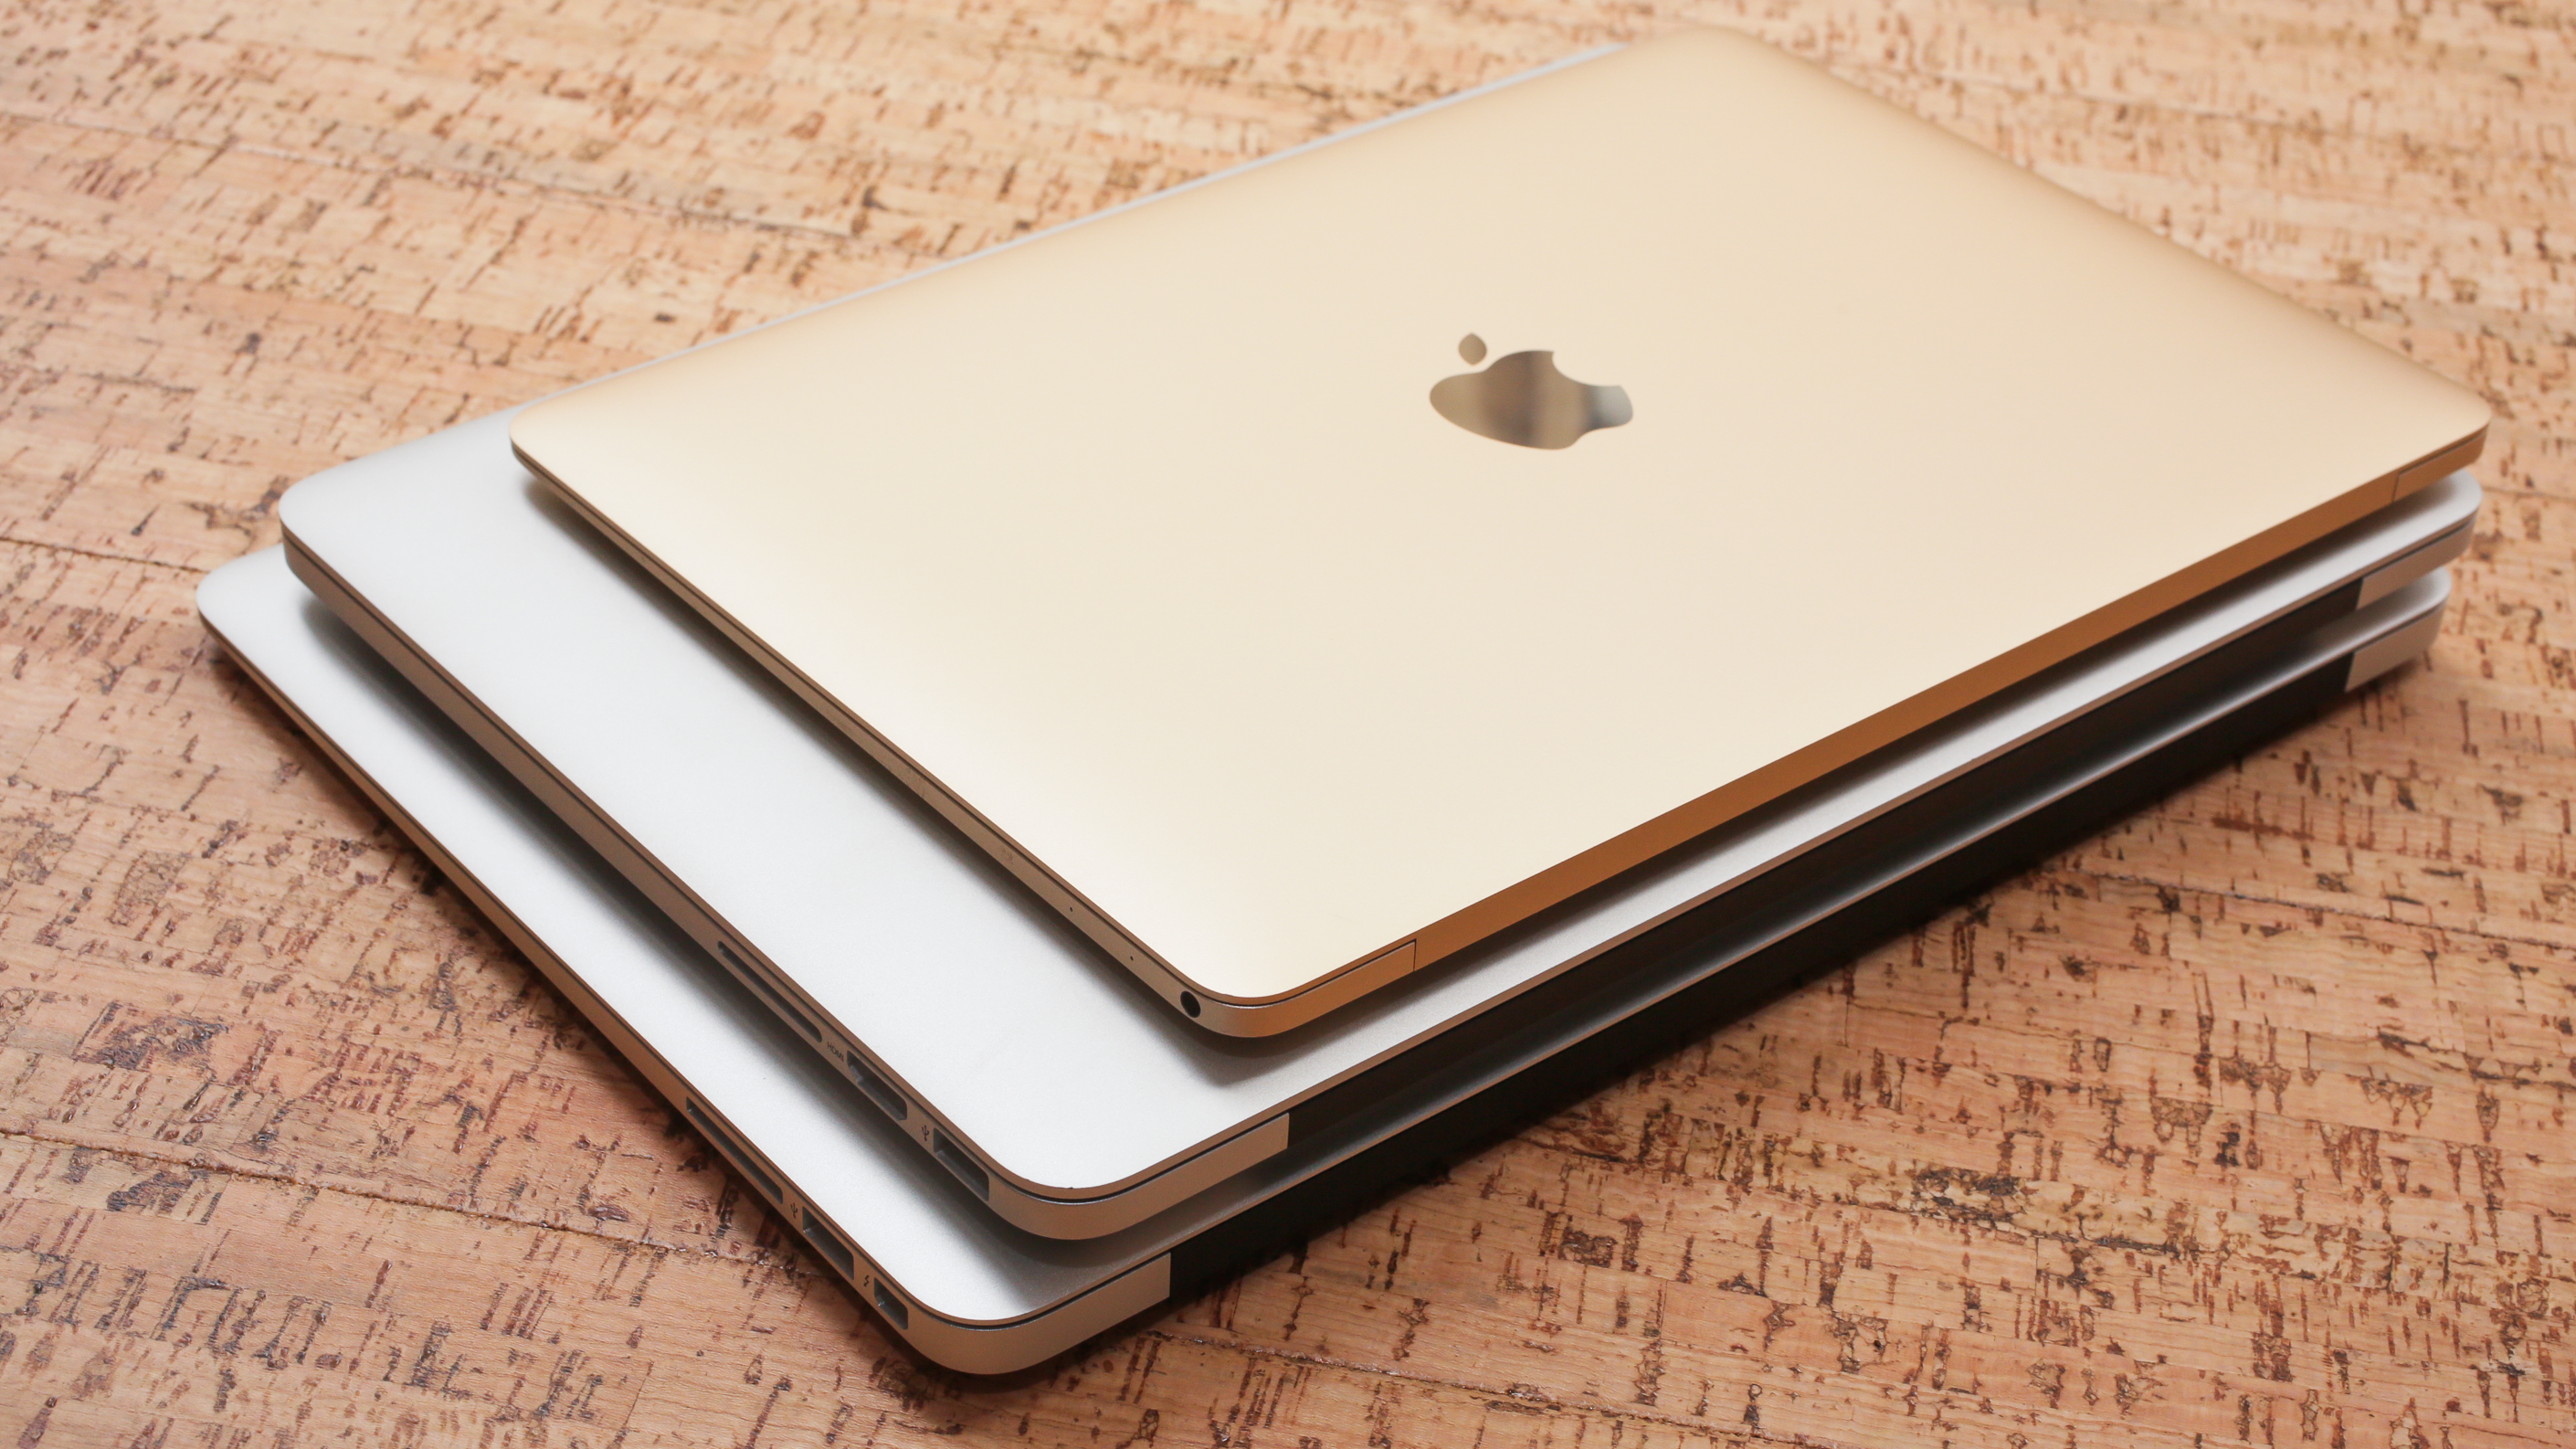 Apple MacBook Air (13-inch, 2015) review: Apple's most affordable 